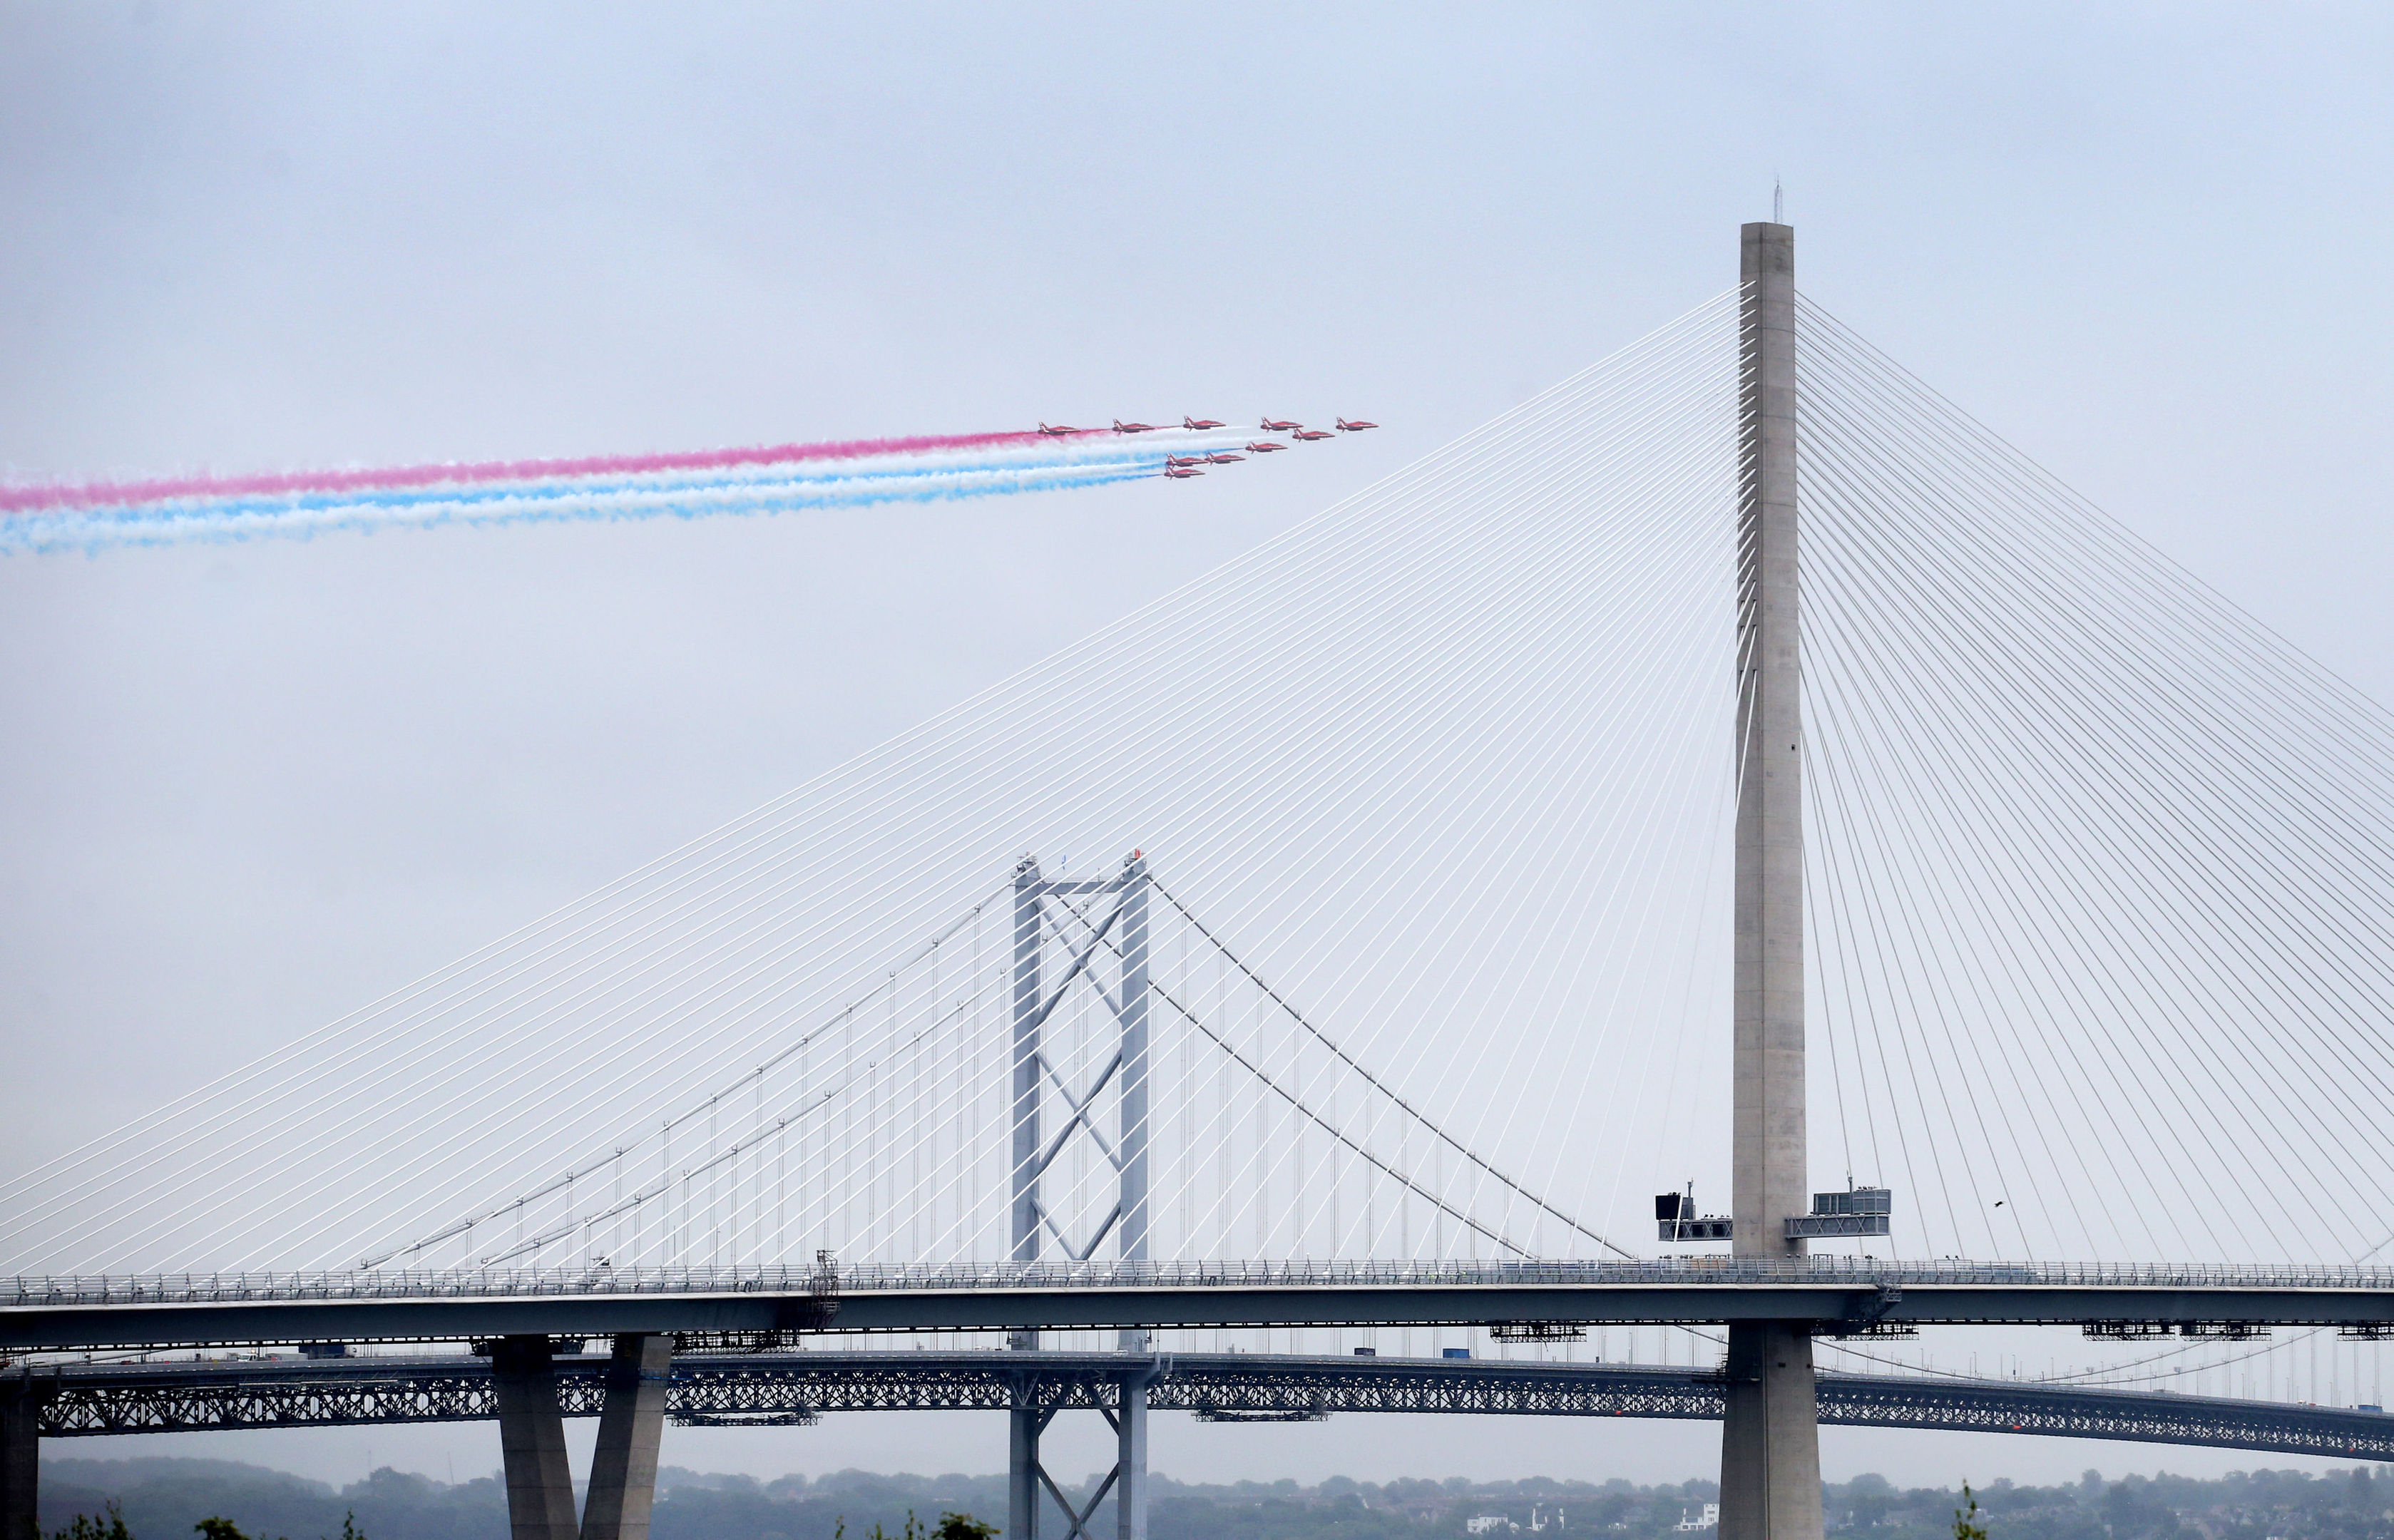 The Red Arrows fly past during the official opening of the Queensferry Crossing.